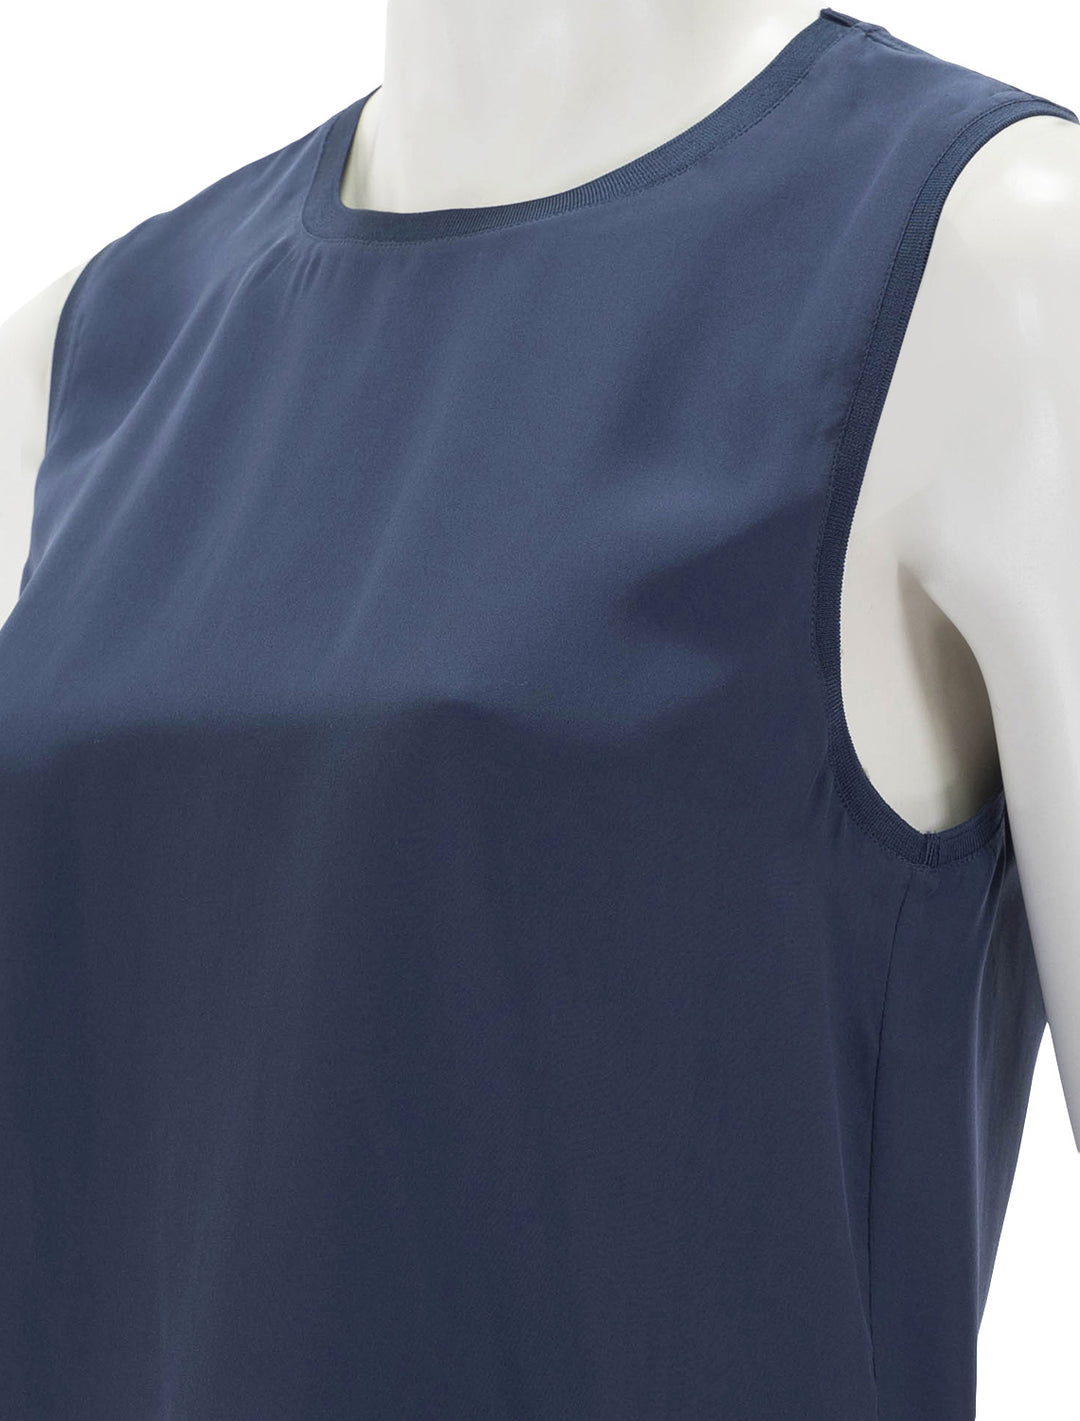 Close-up view of ATM's silk charmeuse muscle tee in true navy.